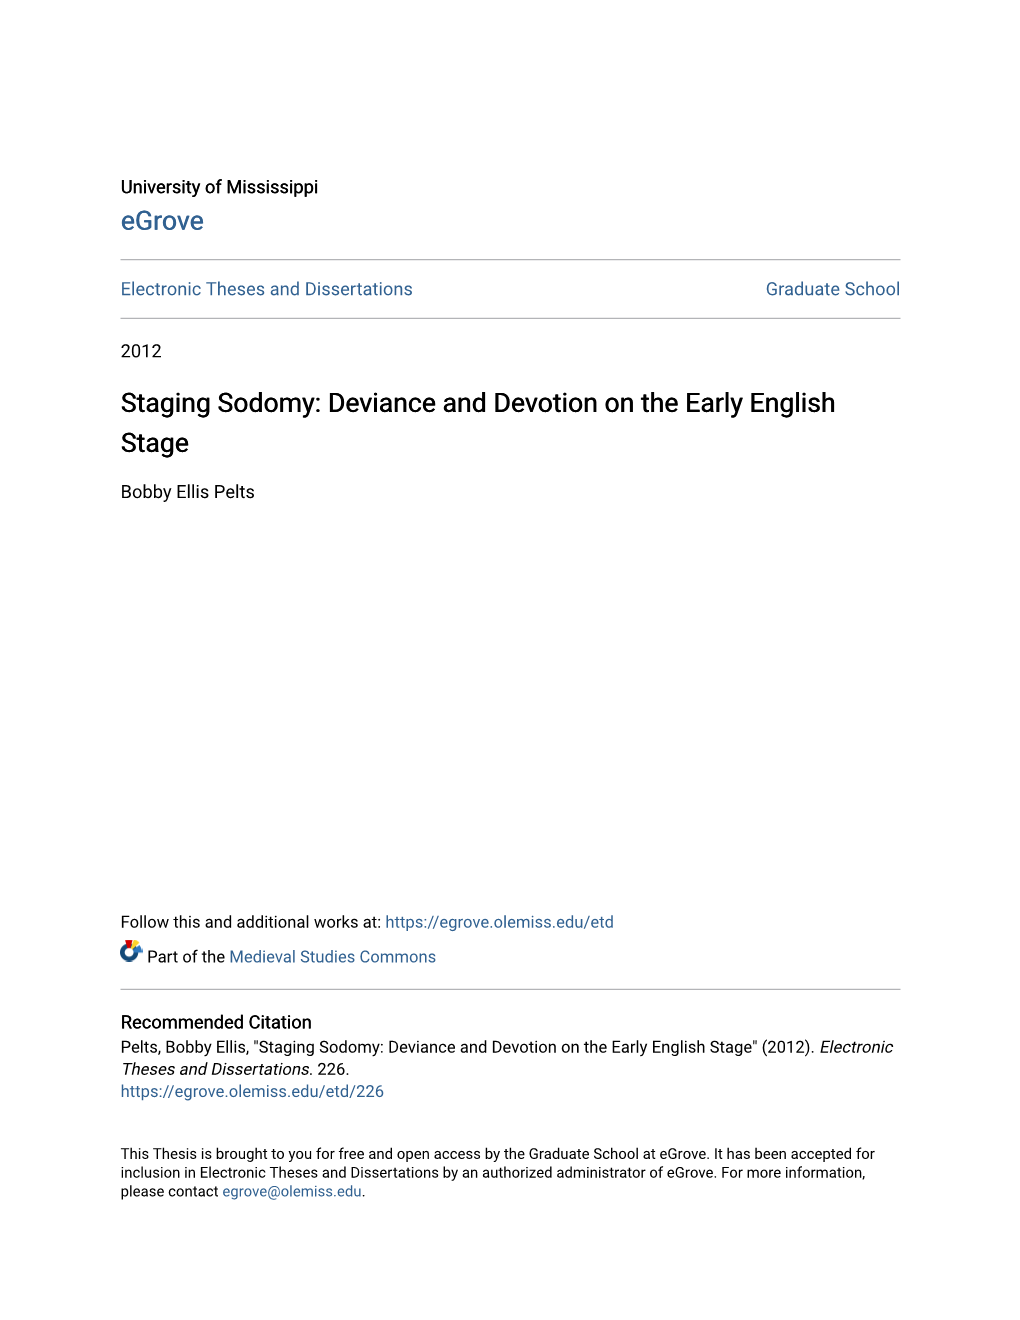 Staging Sodomy: Deviance and Devotion on the Early English Stage